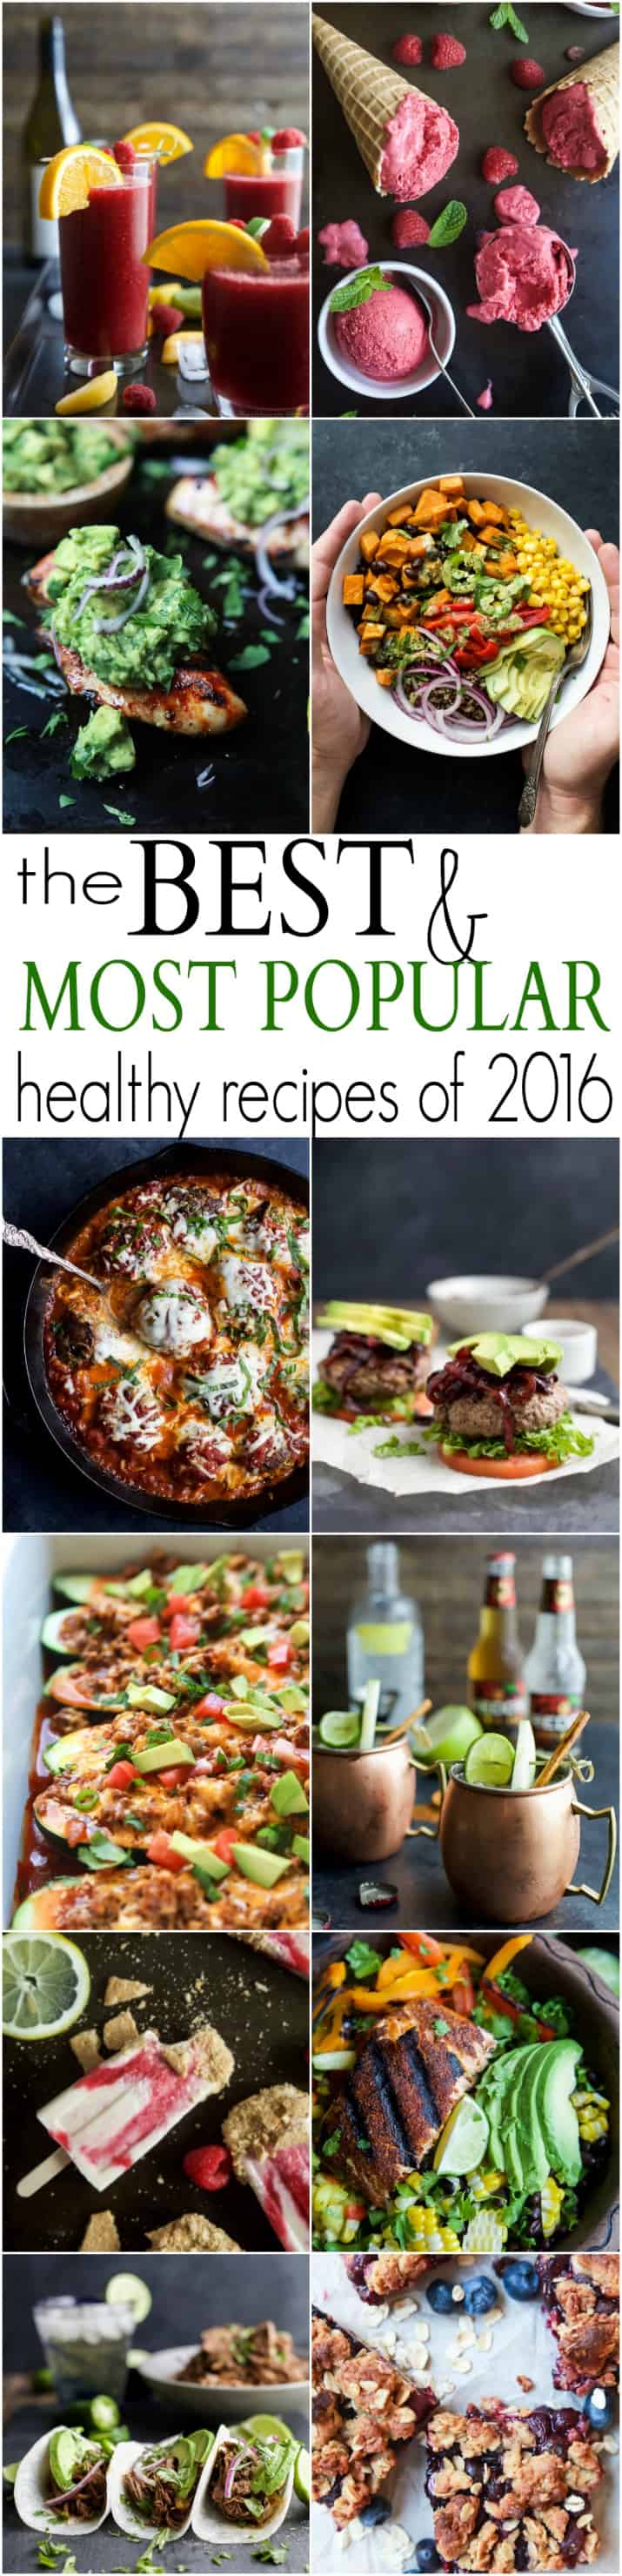 The Best & Most Popular Recipes of 2016 - from breakfast recipes to dinner ideas to date night at home cocktails. The Most Pinned Recipes you're gonna love! | joyfulhealthyeats.com 